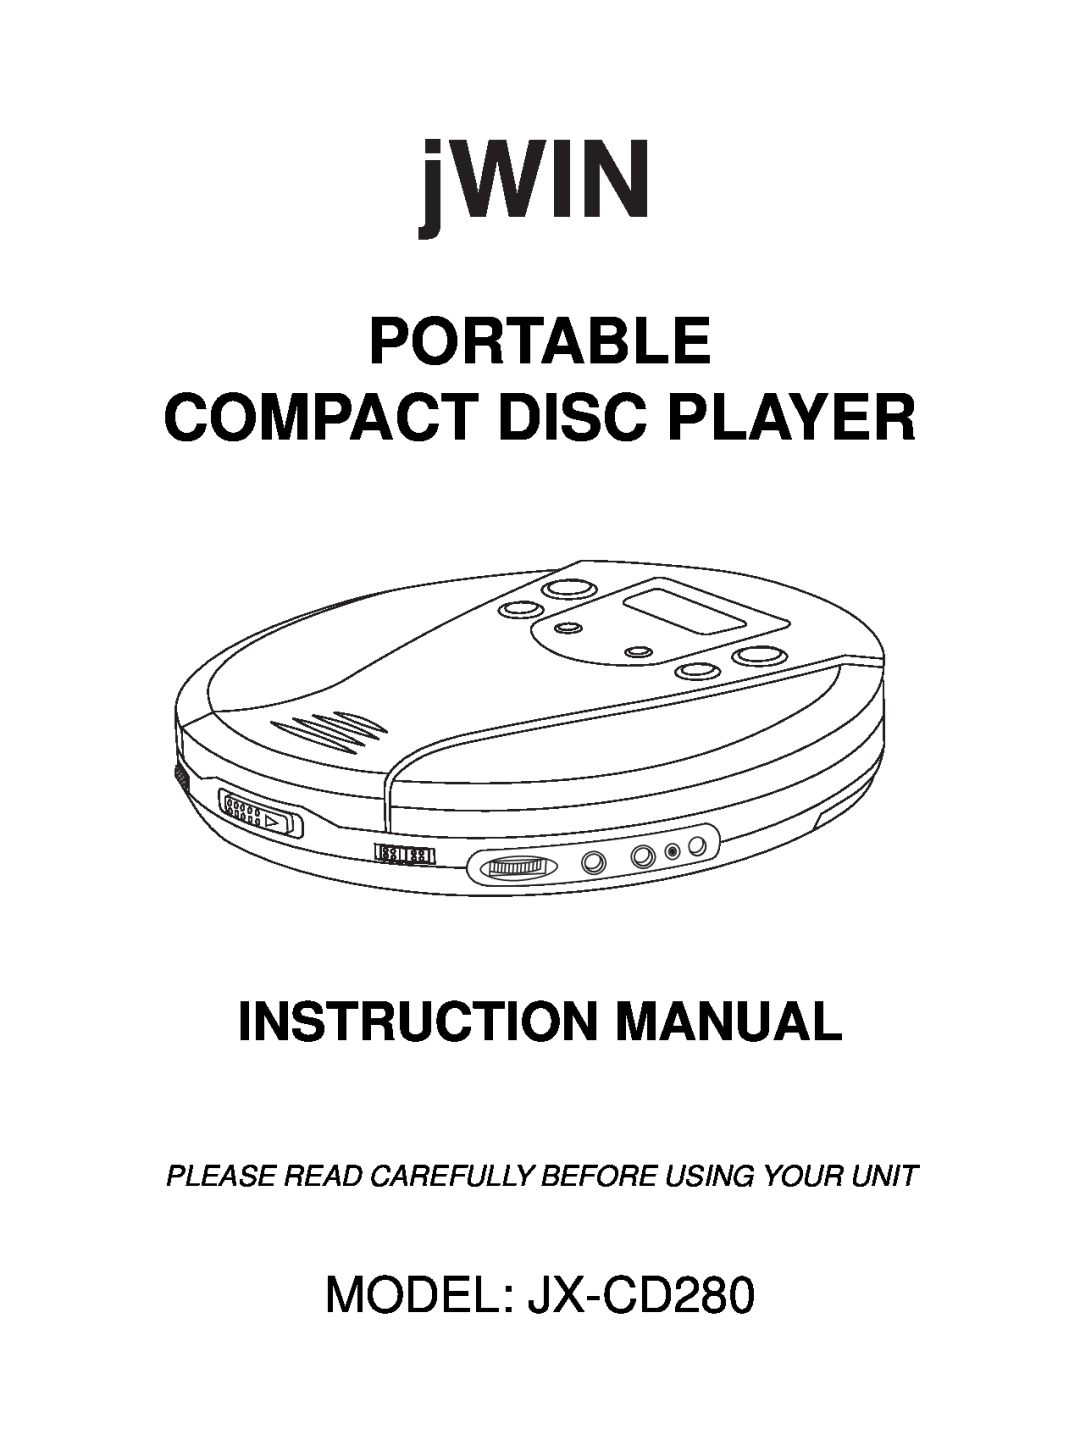 Jwin instruction manual Portable Compact Disc Player, MODEL JX-CD280, Please Read Carefully Before Using Your Unit 